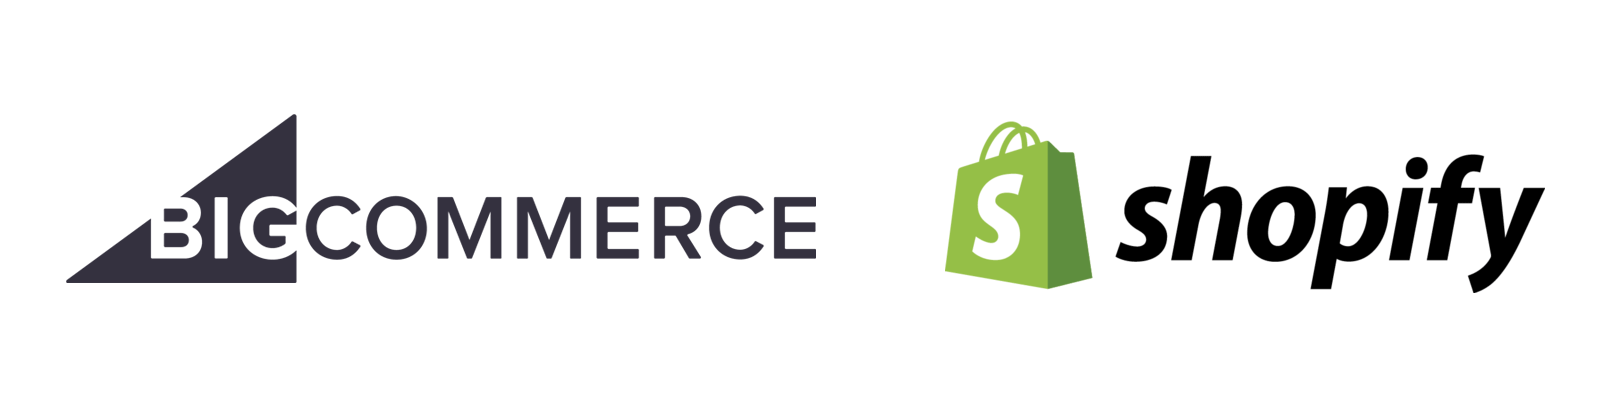 BigCommerce and Shopify